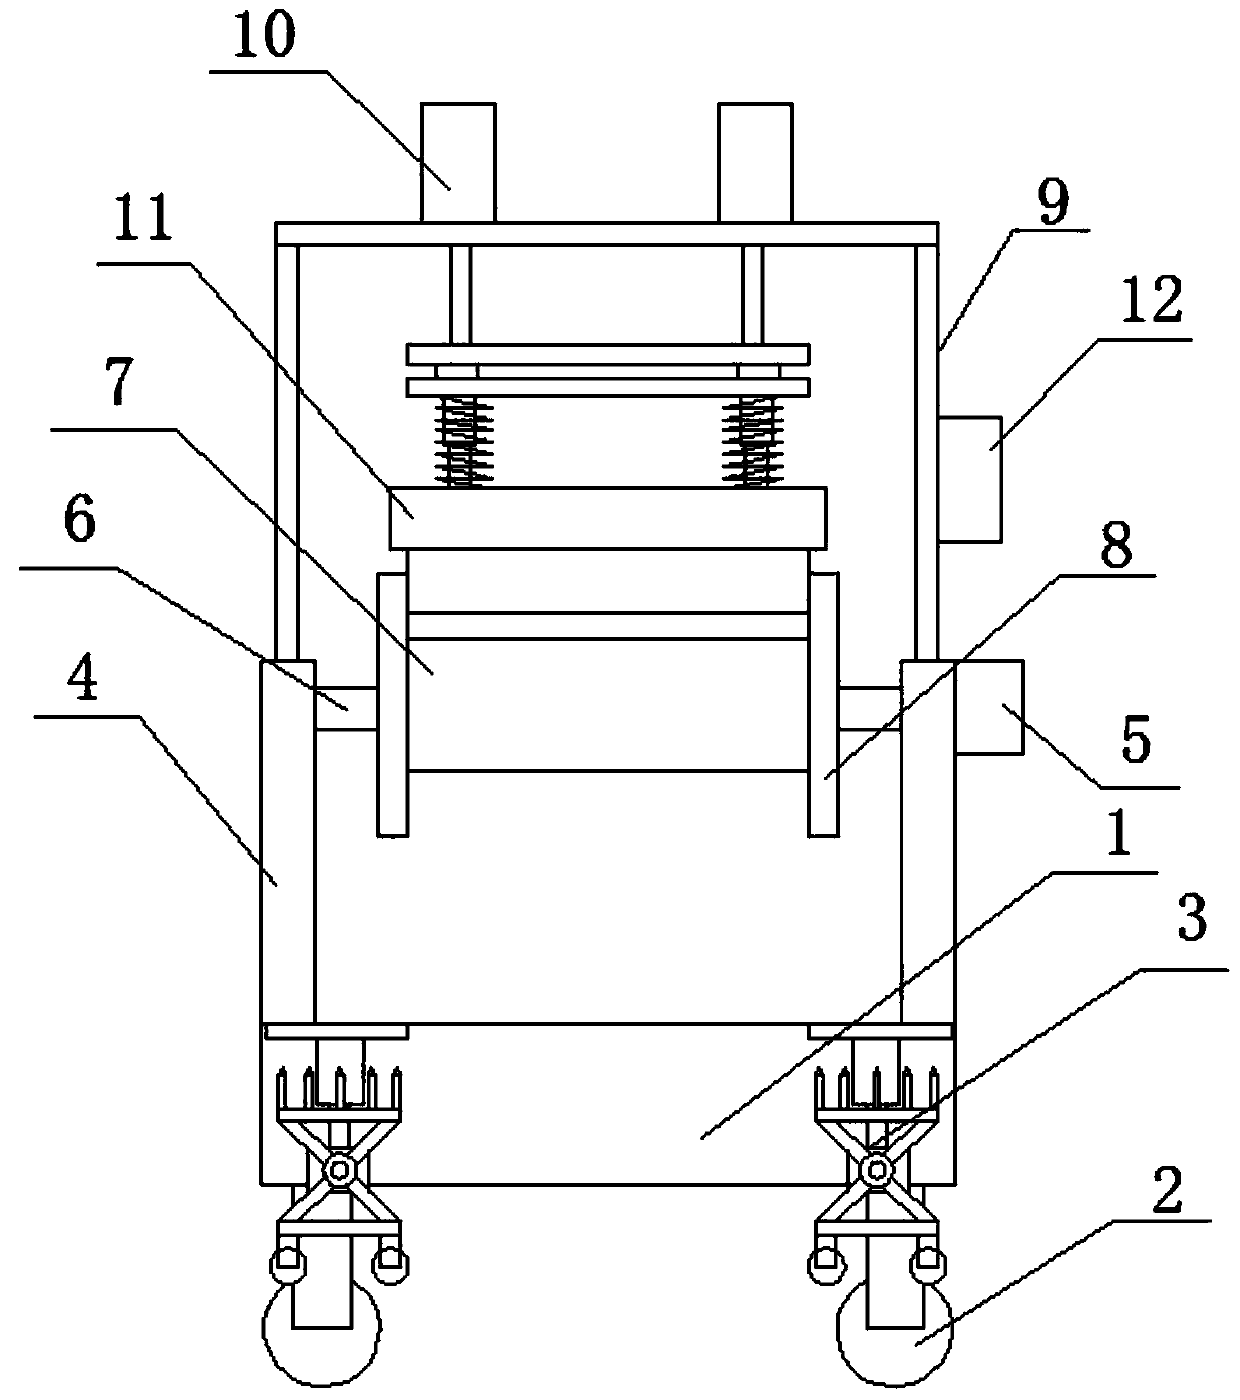 Cable take-up and pay-off device capable of compressing cable for communication engineering